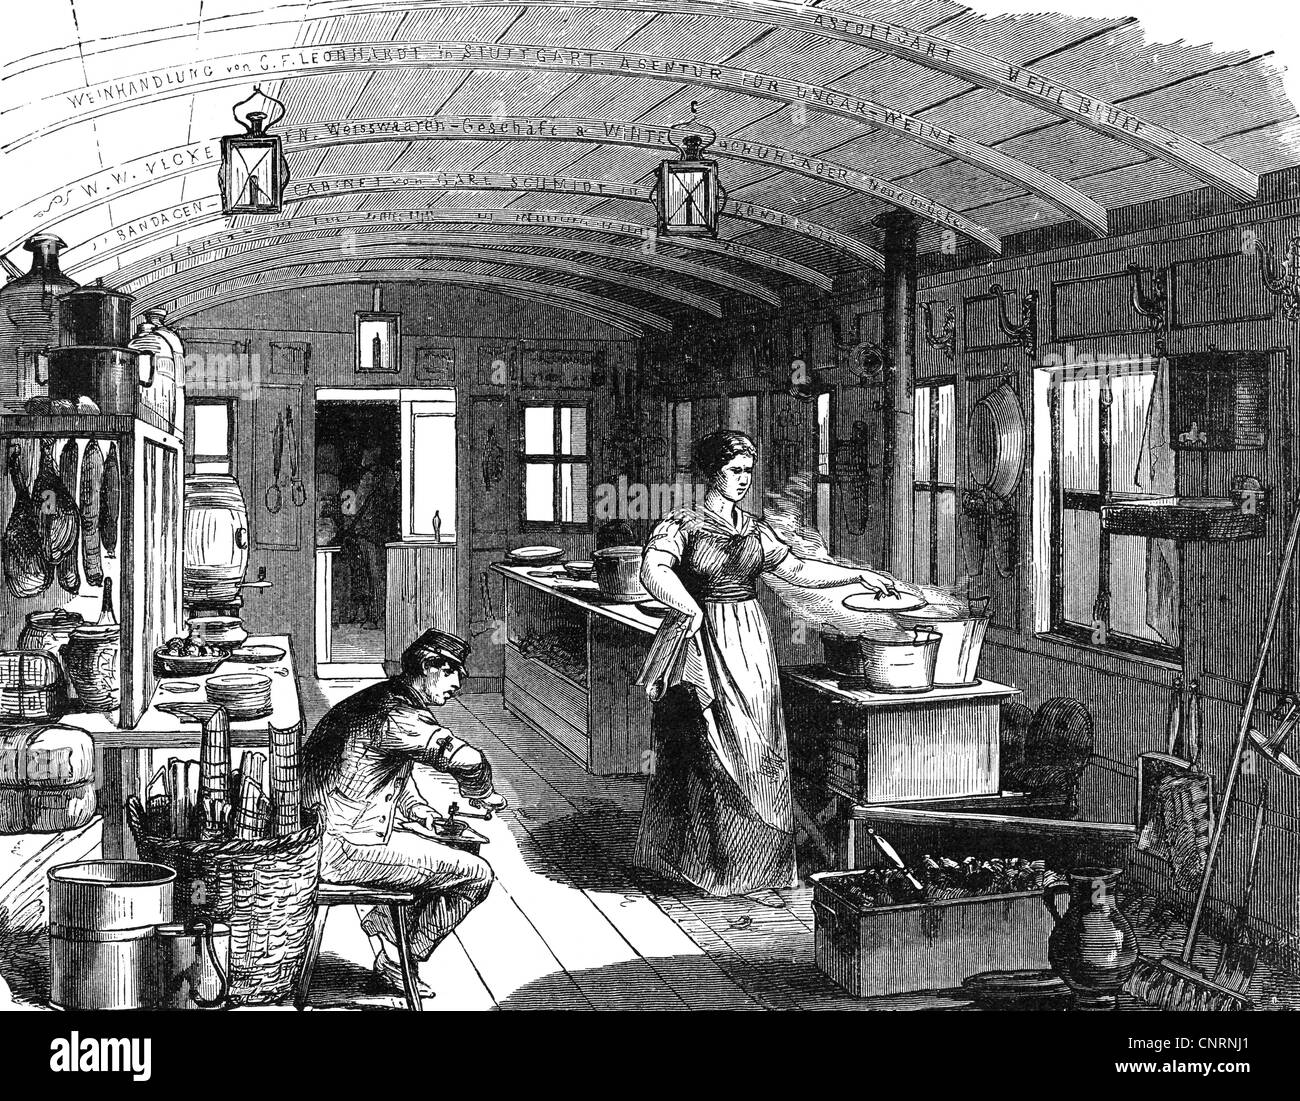 events, Franco-Prussian War 1870 - 1871, medical service, Wuerttemberg railway hospital, kitchen wagon, 1870, wood engraving, late 19th century, medicine, military, food, cook, Germany, Franco - Prussian, historic, historical, Wurttemberg, Württemberg, people, Additional-Rights-Clearences-Not Available Stock Photo